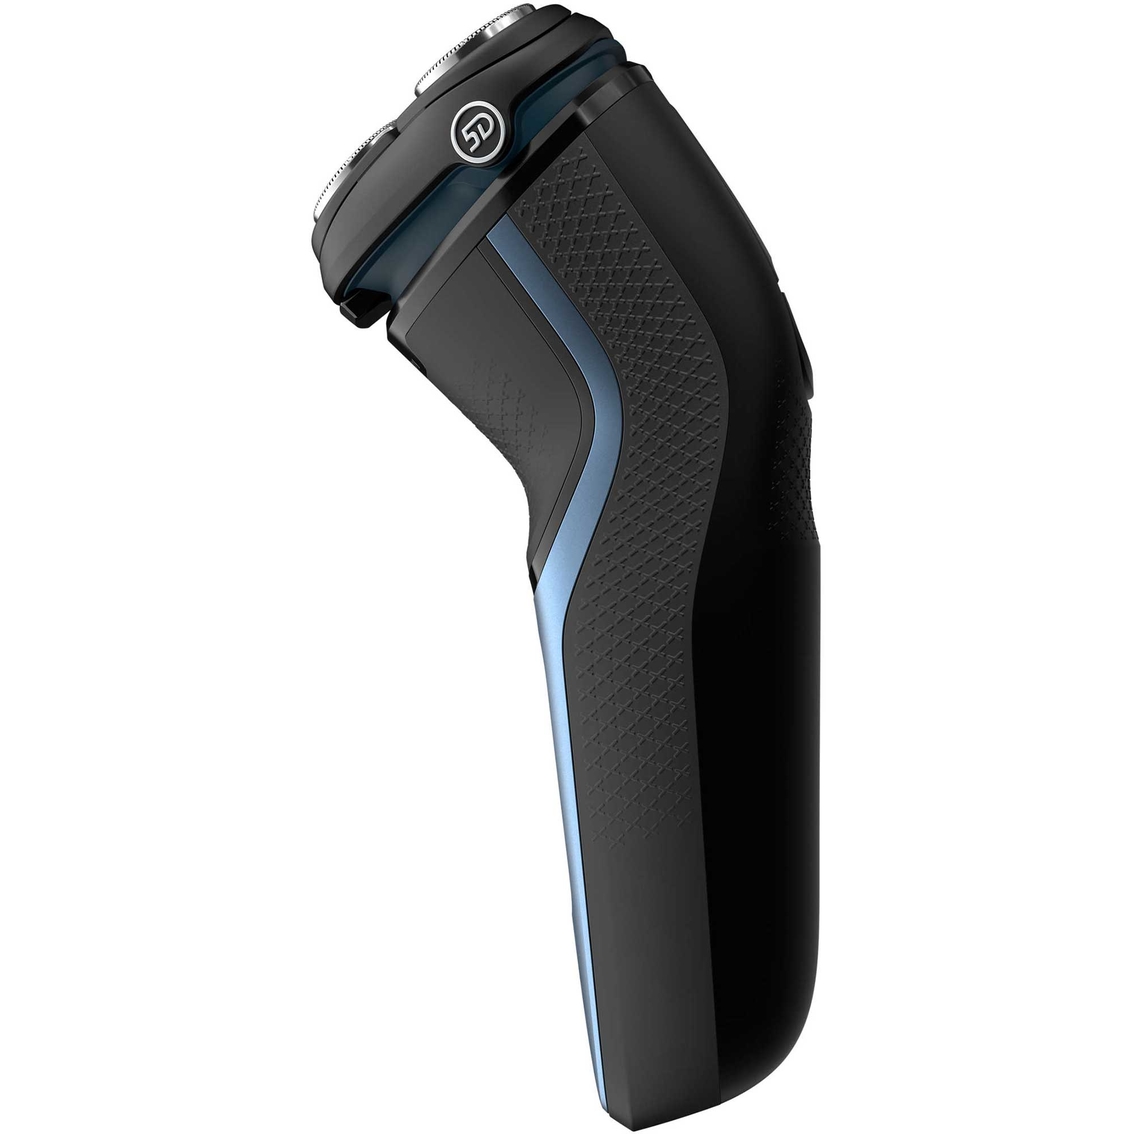 Philips Norelco 3500 Shaver - Image 5 of 10